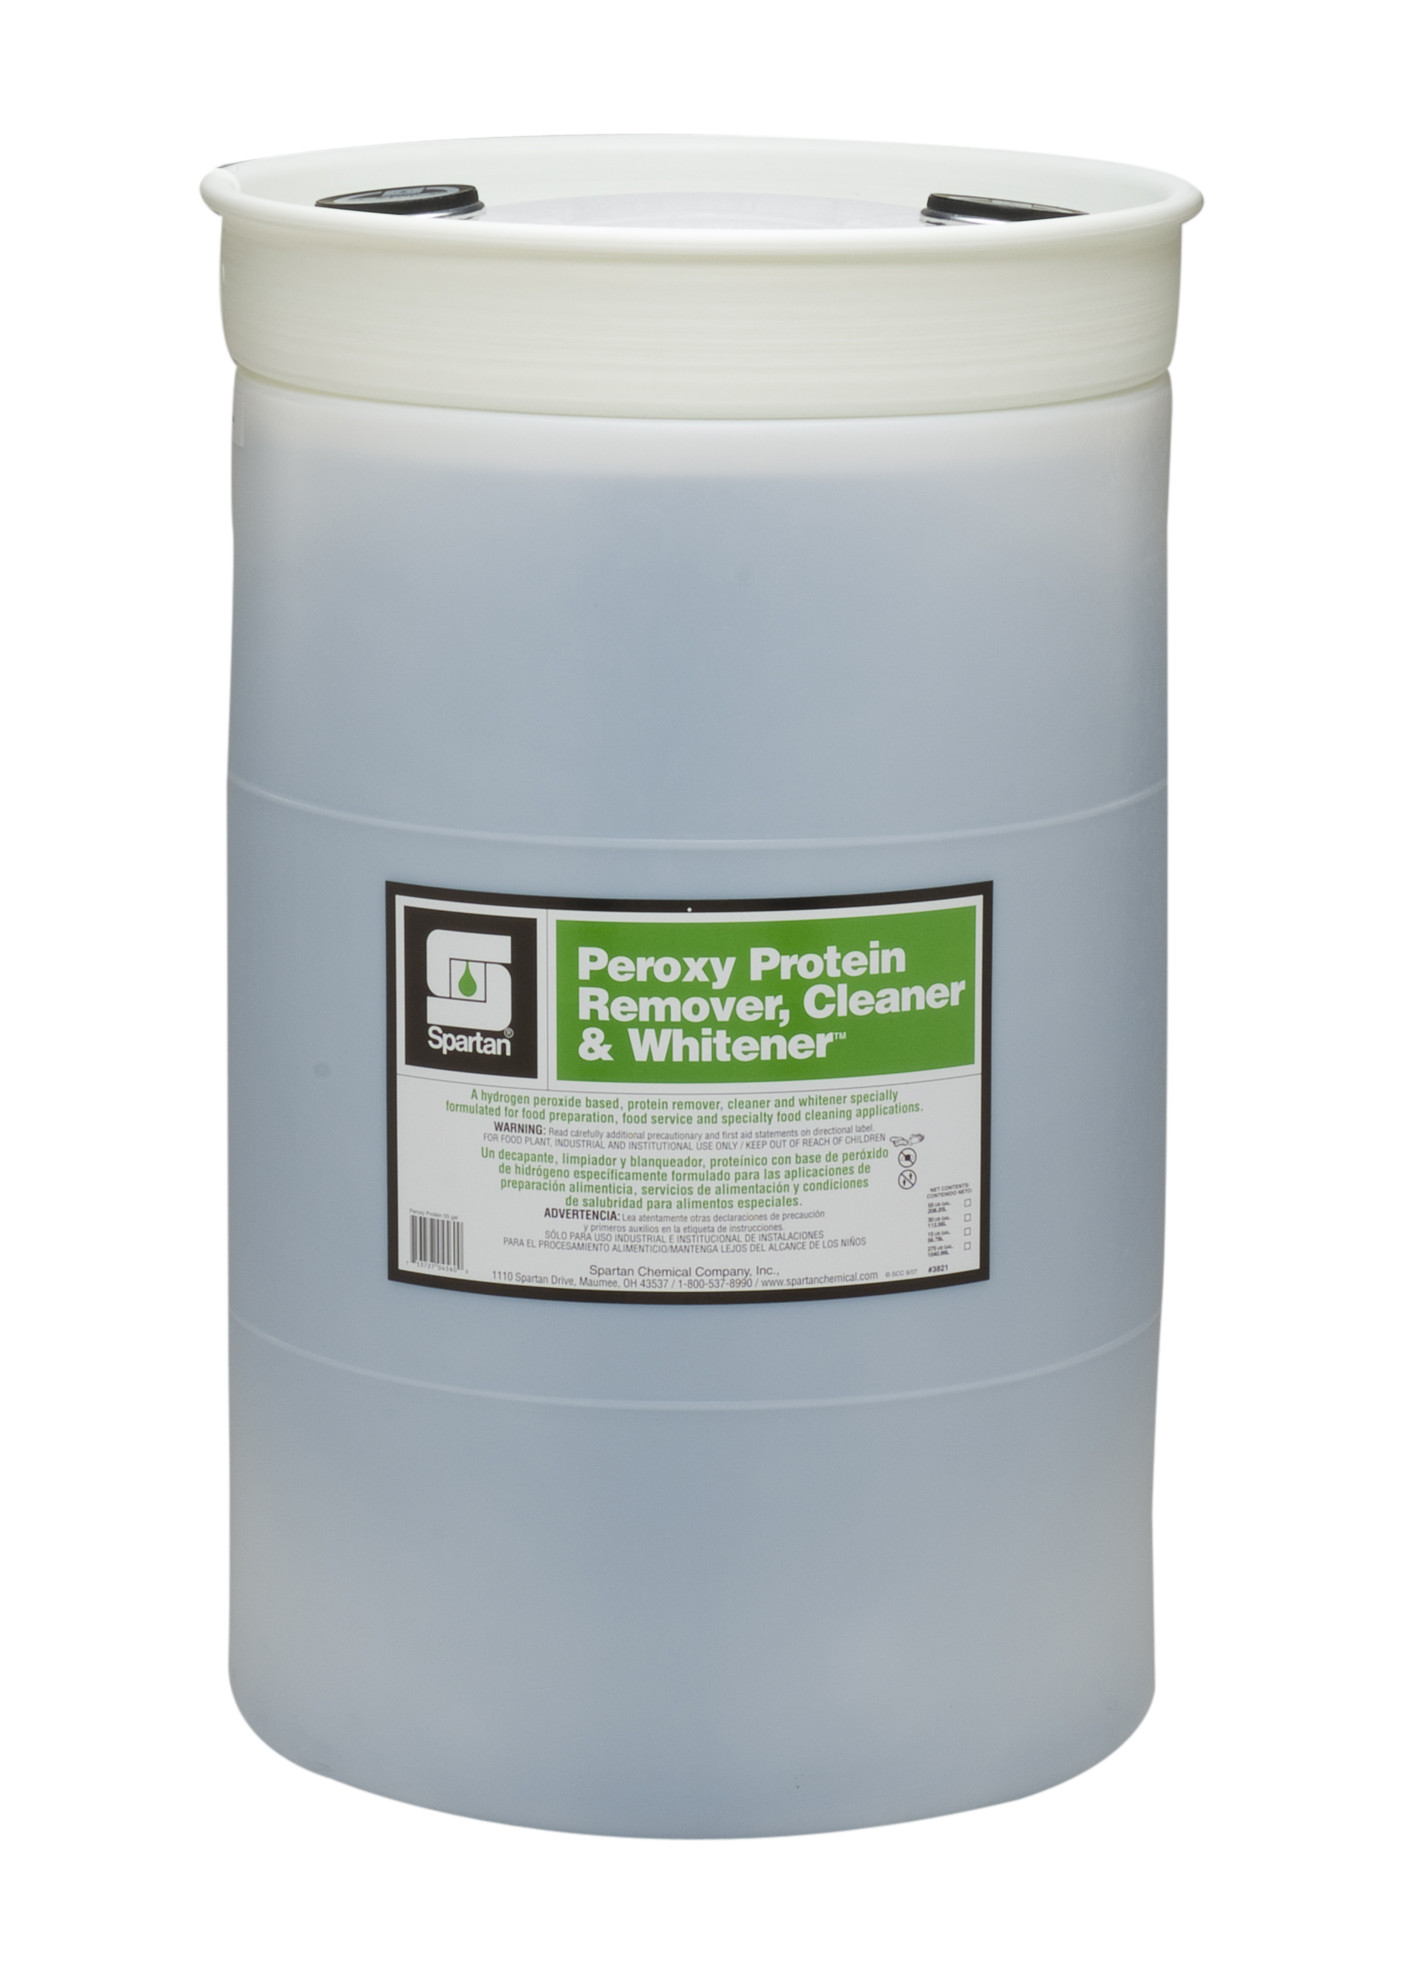 Spartan Chemical Company Peroxy Protein Remover, Cleaner & Whitener, 30 GAL DRUM